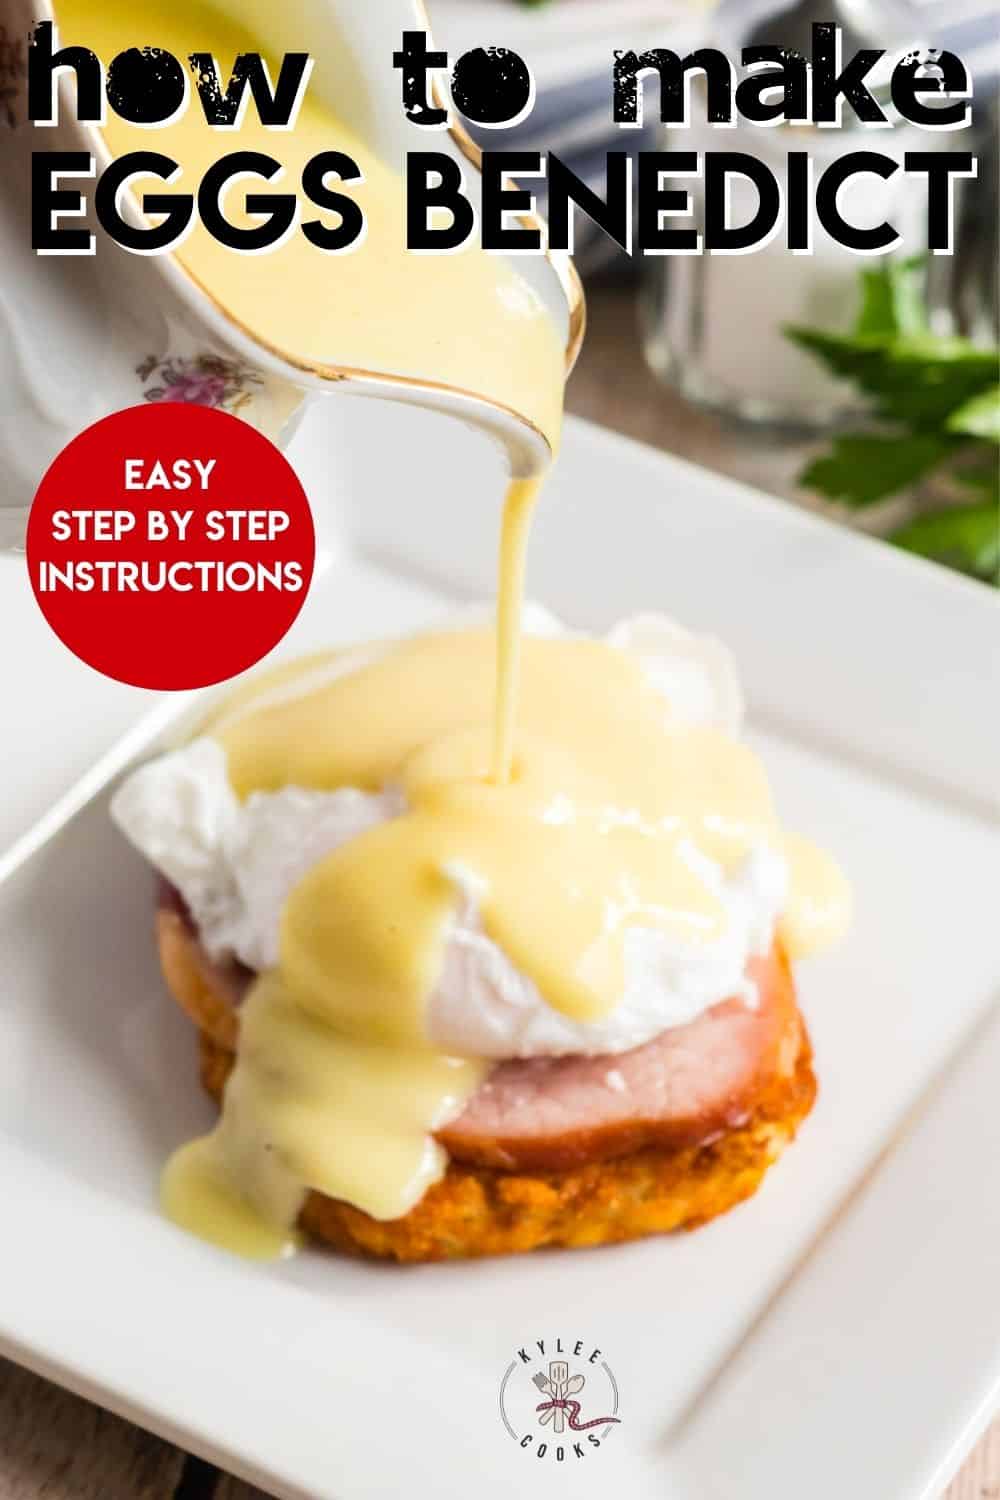 eggs benedict with sauce being poured over the top